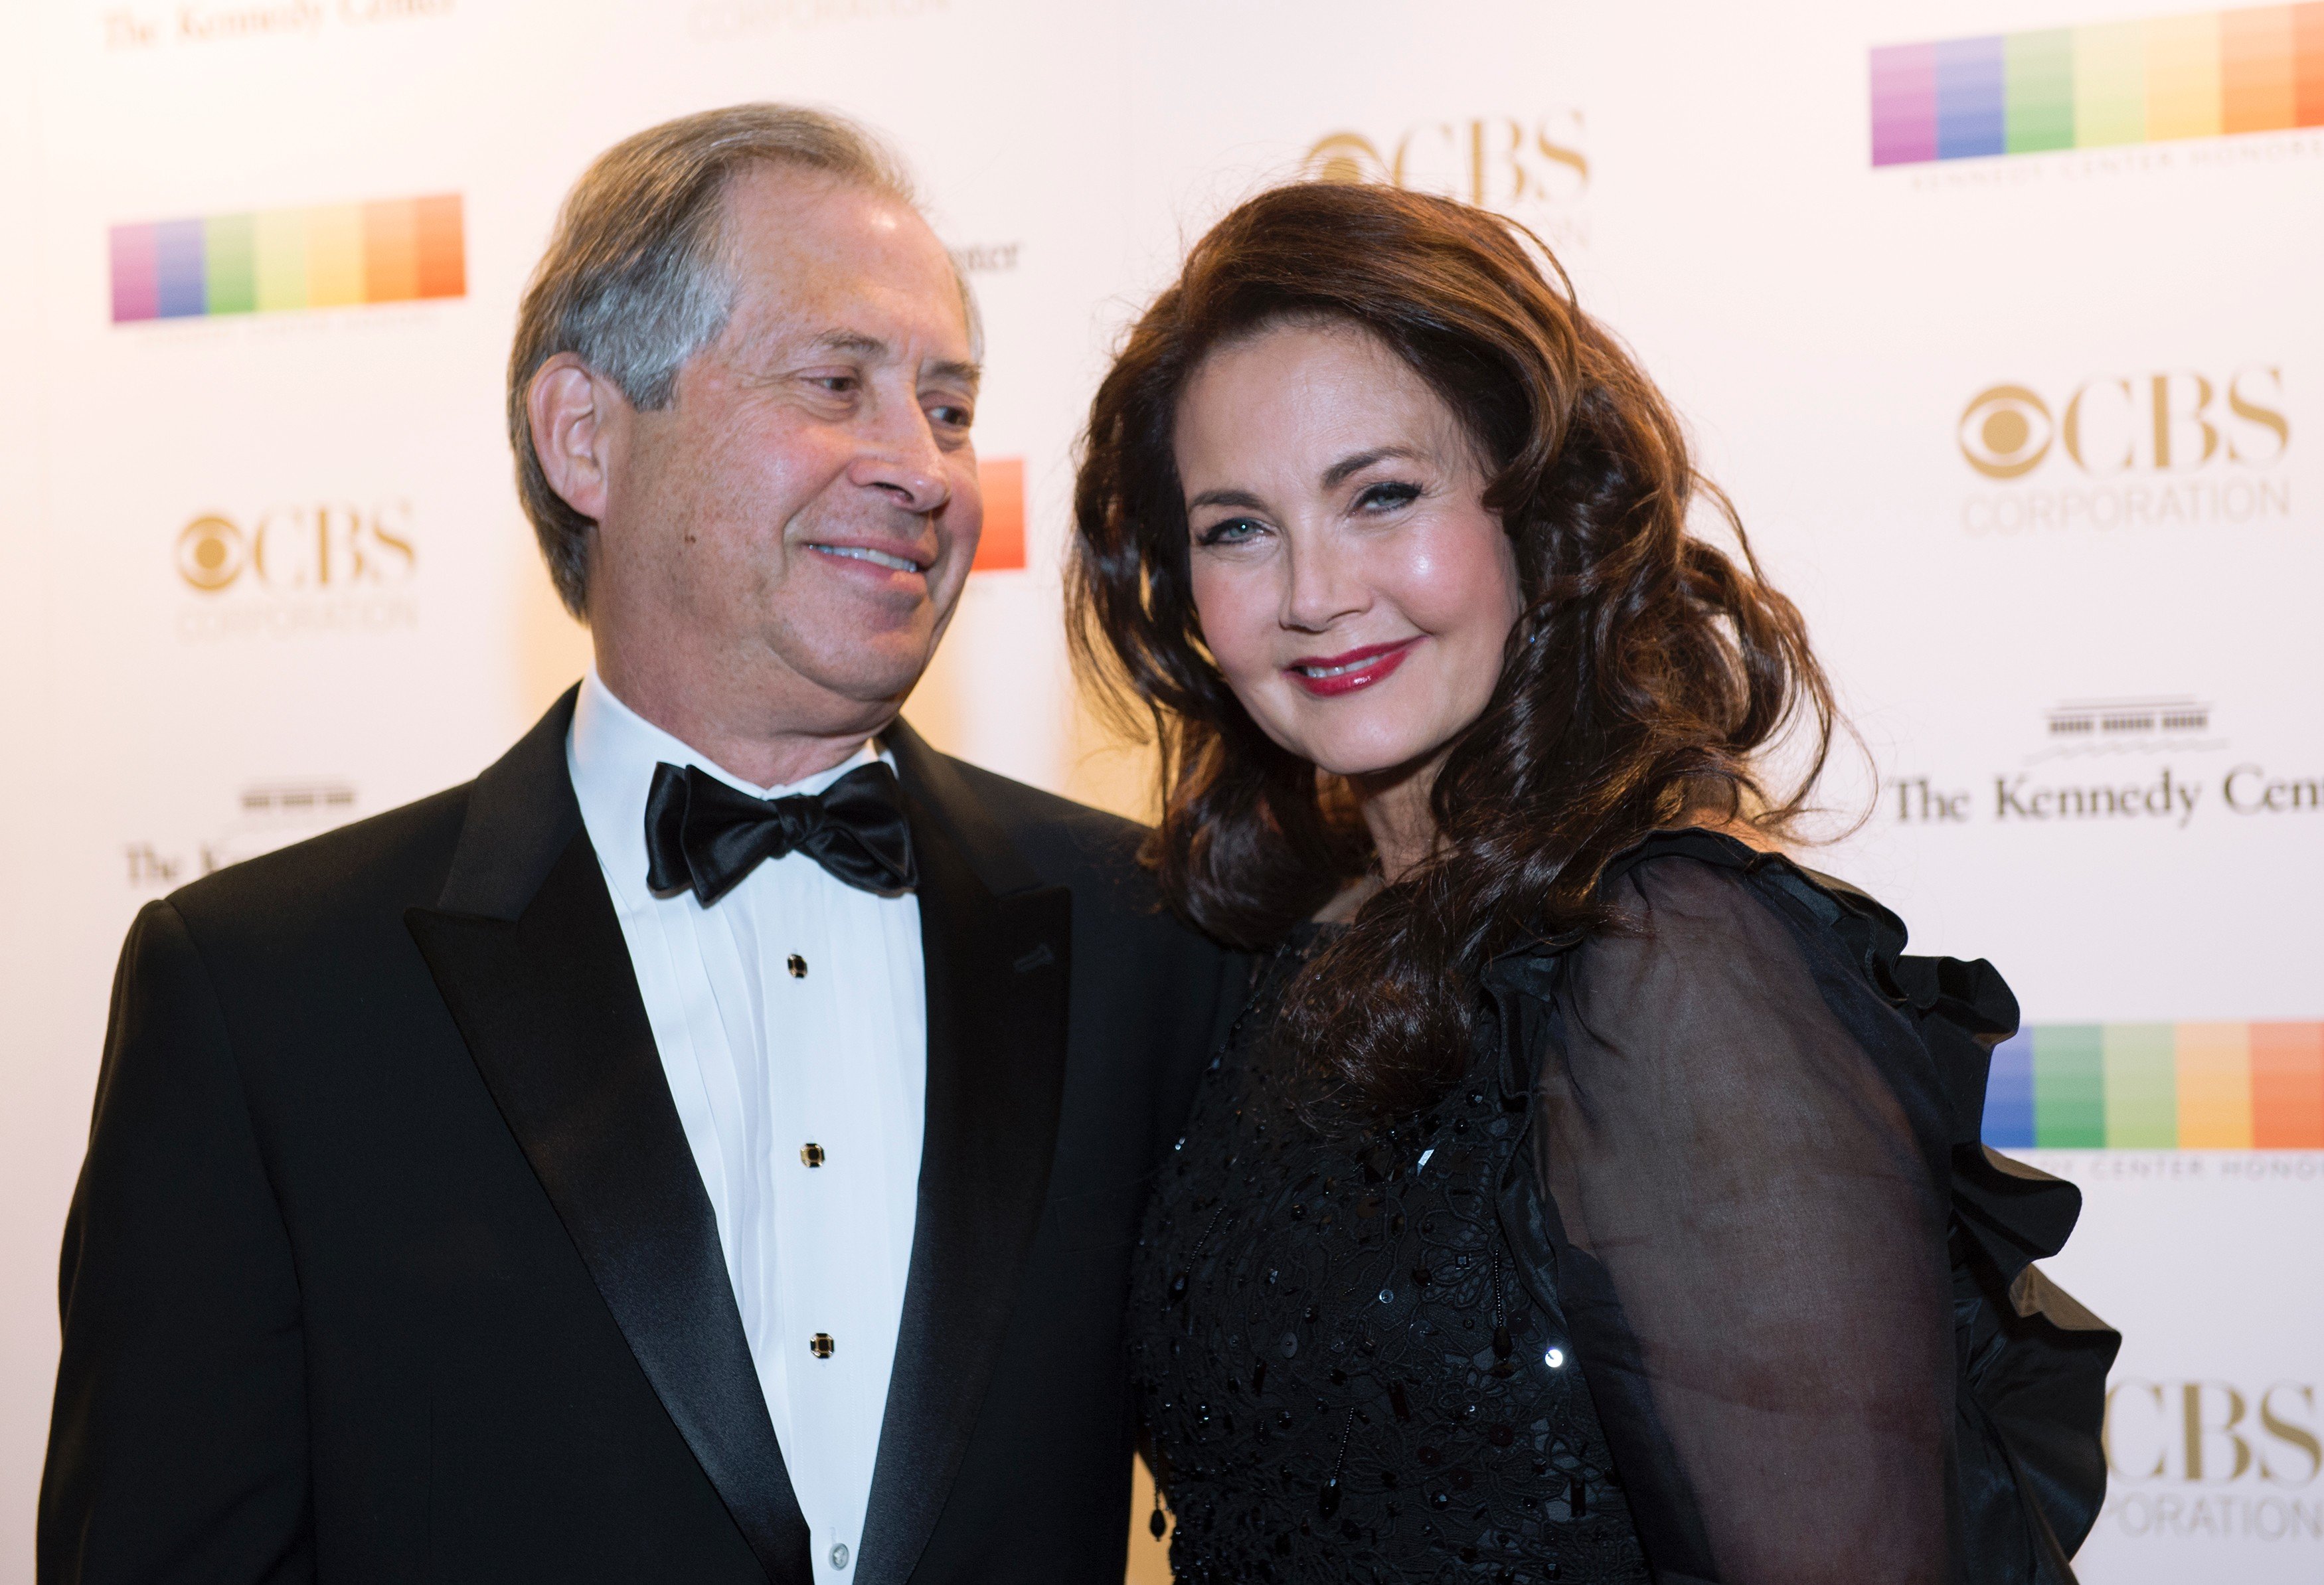 Lynda Carter and her late husband, Robert Altman, pictured at the 38th Annual Kennedy Center Honors, 2015, Washington, DC. | Photo: Getting Images